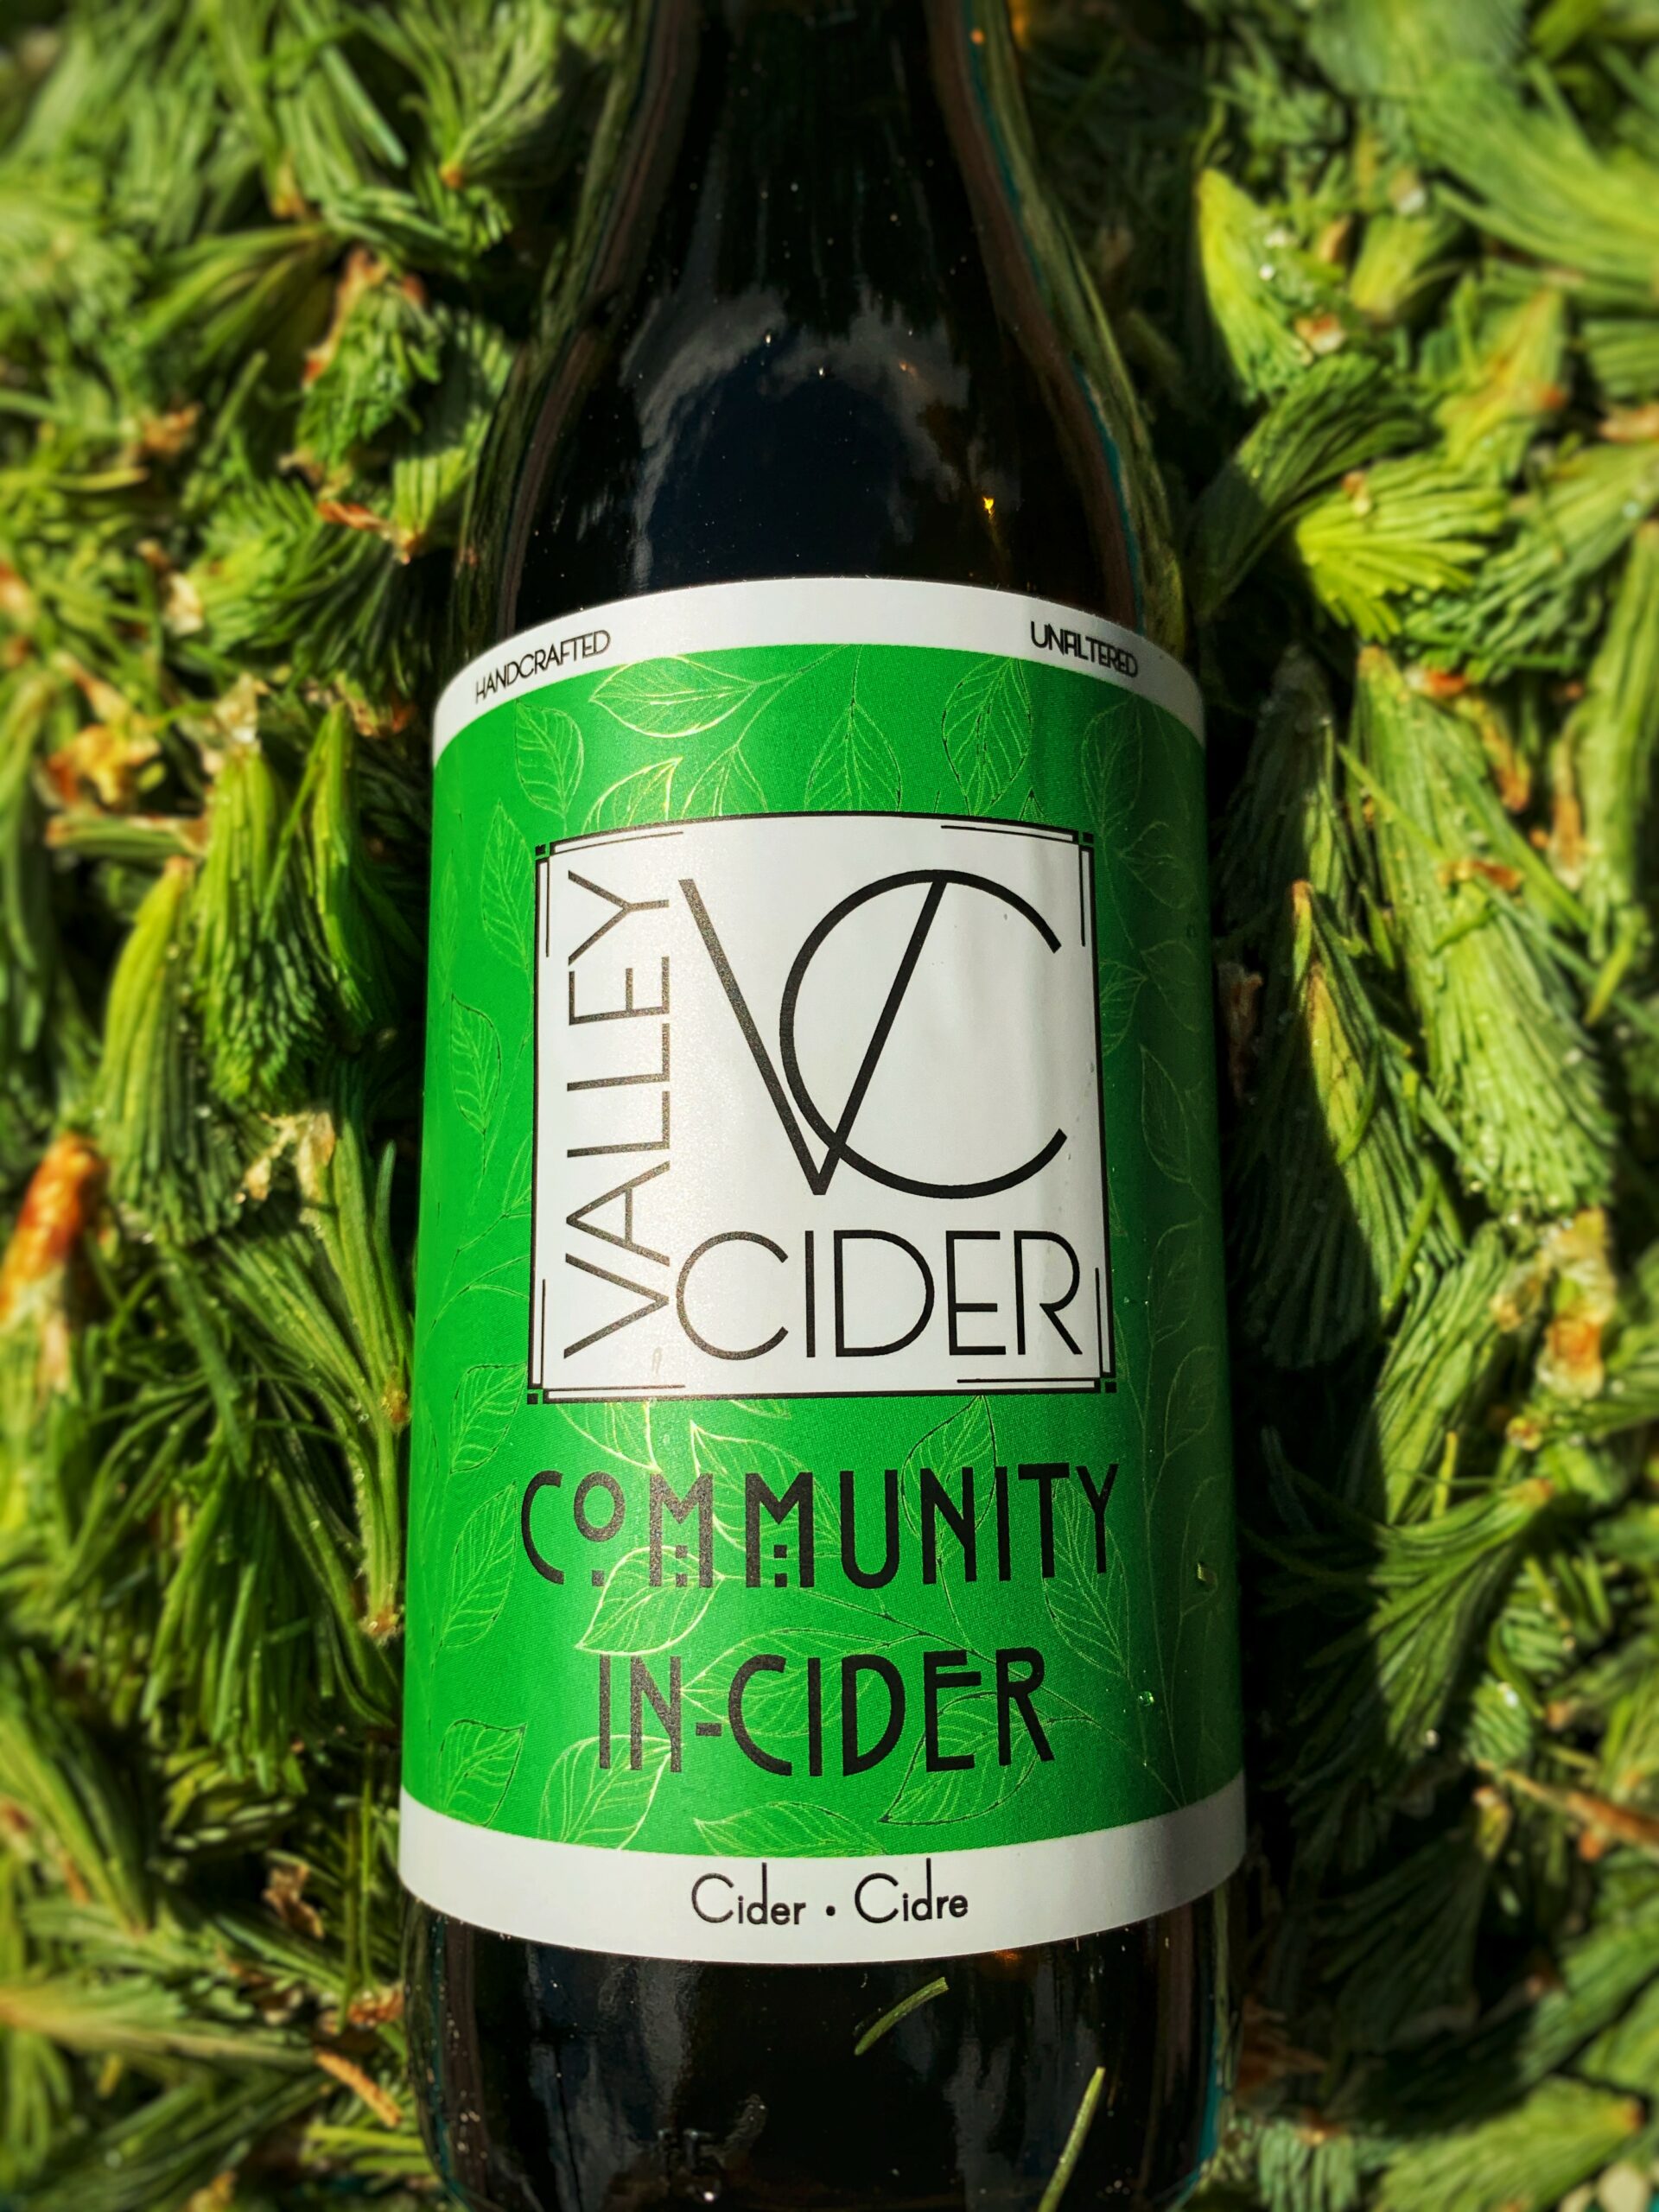 Valley Cider Company and the Cowichan Green Community partner up for another seasonal cider